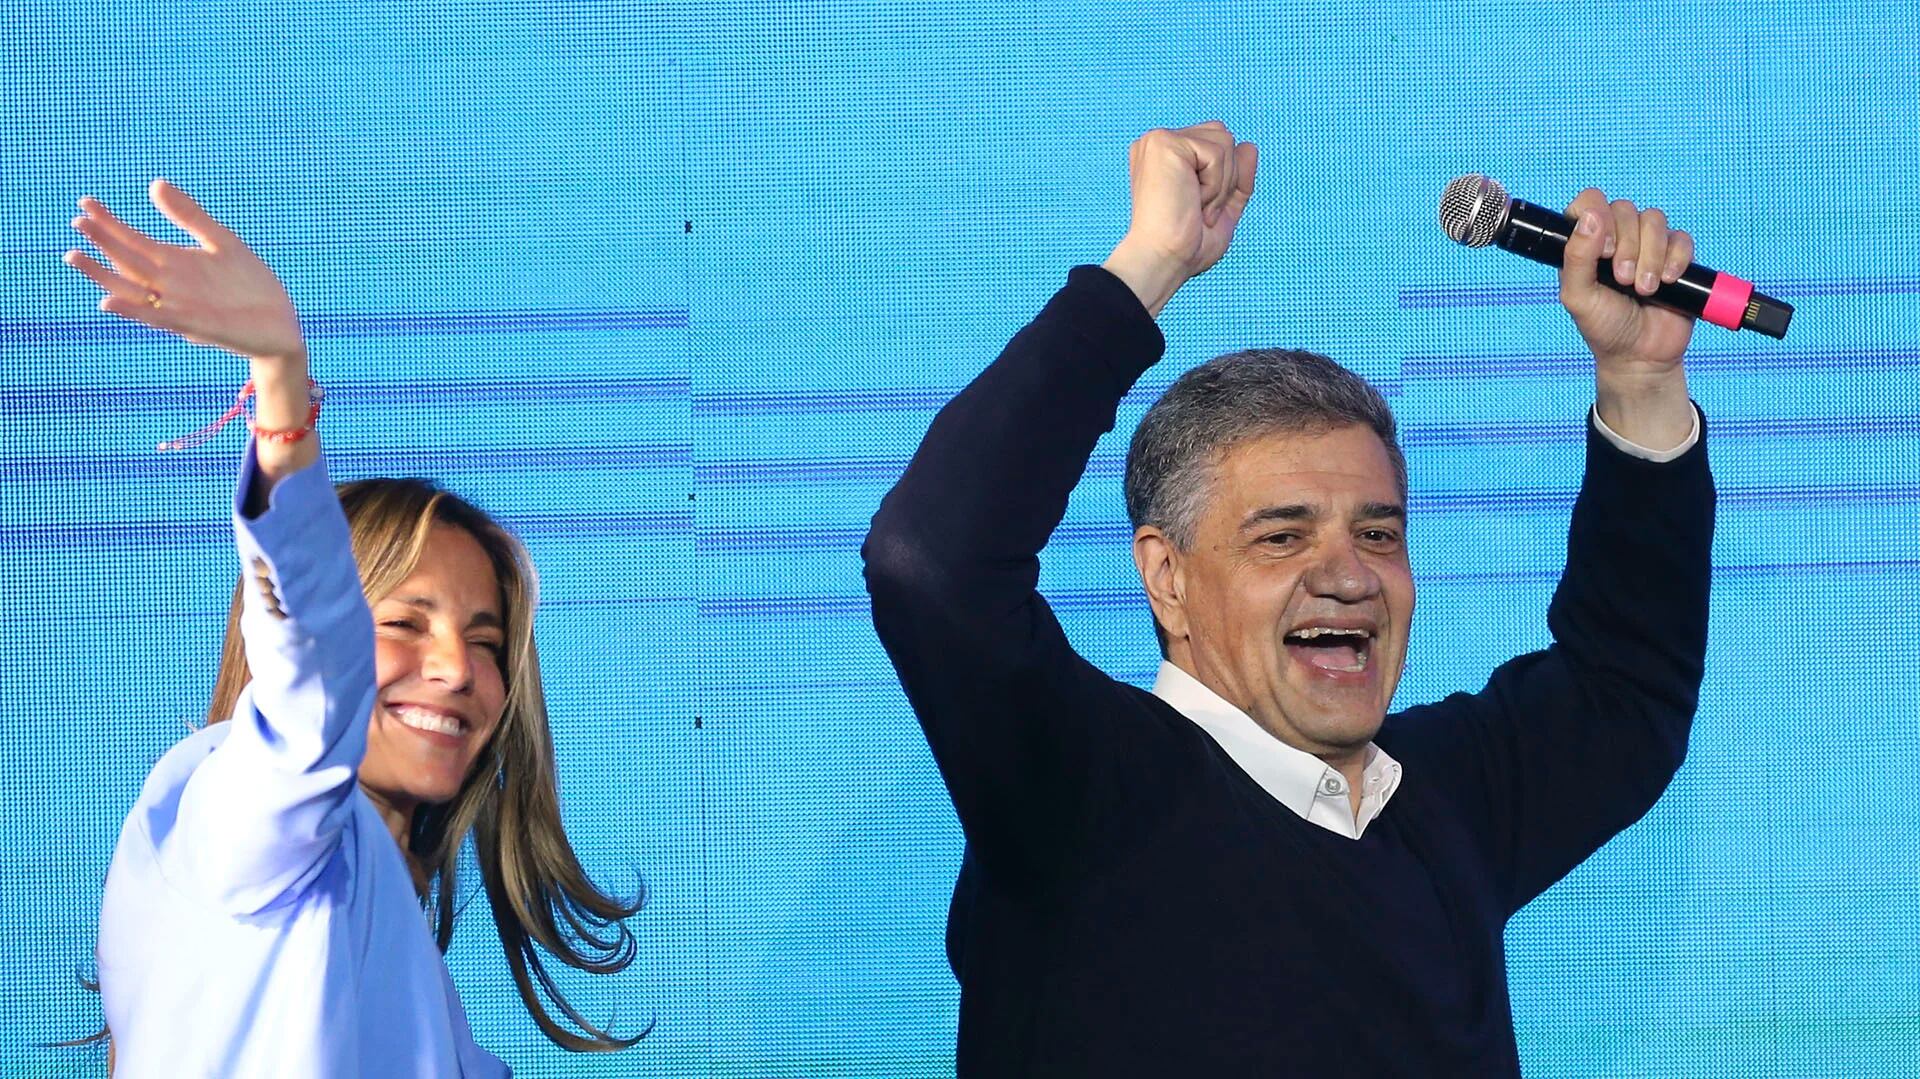 Jorge Macri, a candidate for mayor of the city of Buenos Aires, celebrates at the campaign headquarters of presidential candidate Patricia Bullrich after the polls closed for the general elections, in Buenos Aires, Argentina, Sunday, Oct. 22, 2023. (AP Photo/Daniel Jayo)